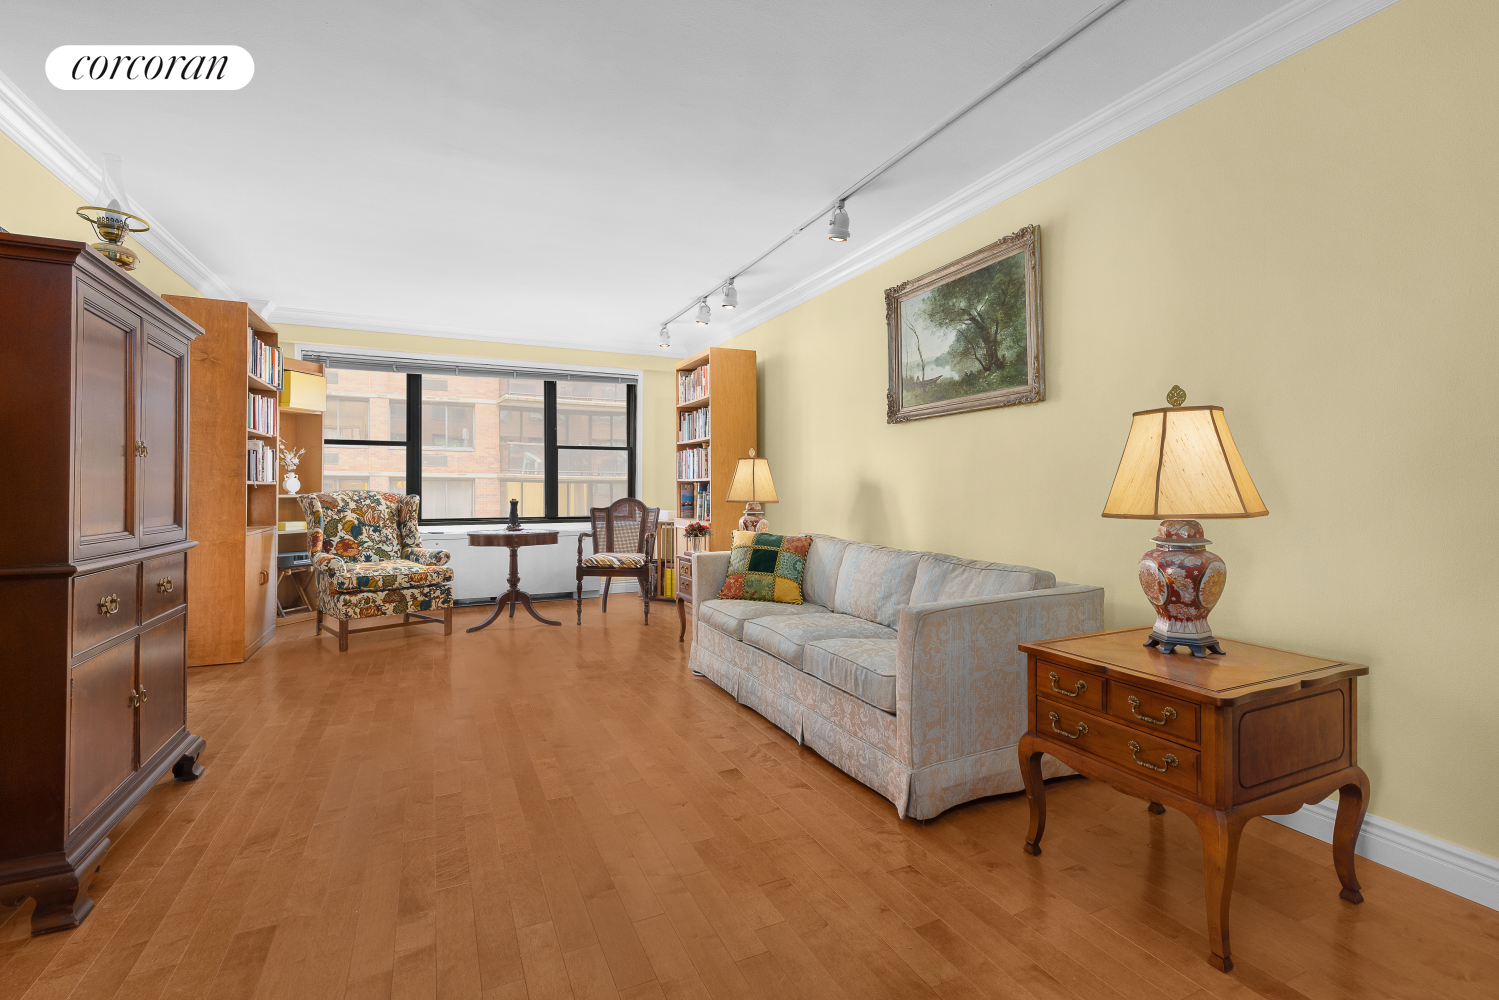 505 East 79th Street 8C, Yorkville, Upper East Side, NYC - 2 Bedrooms  
1 Bathrooms  
4 Rooms - 